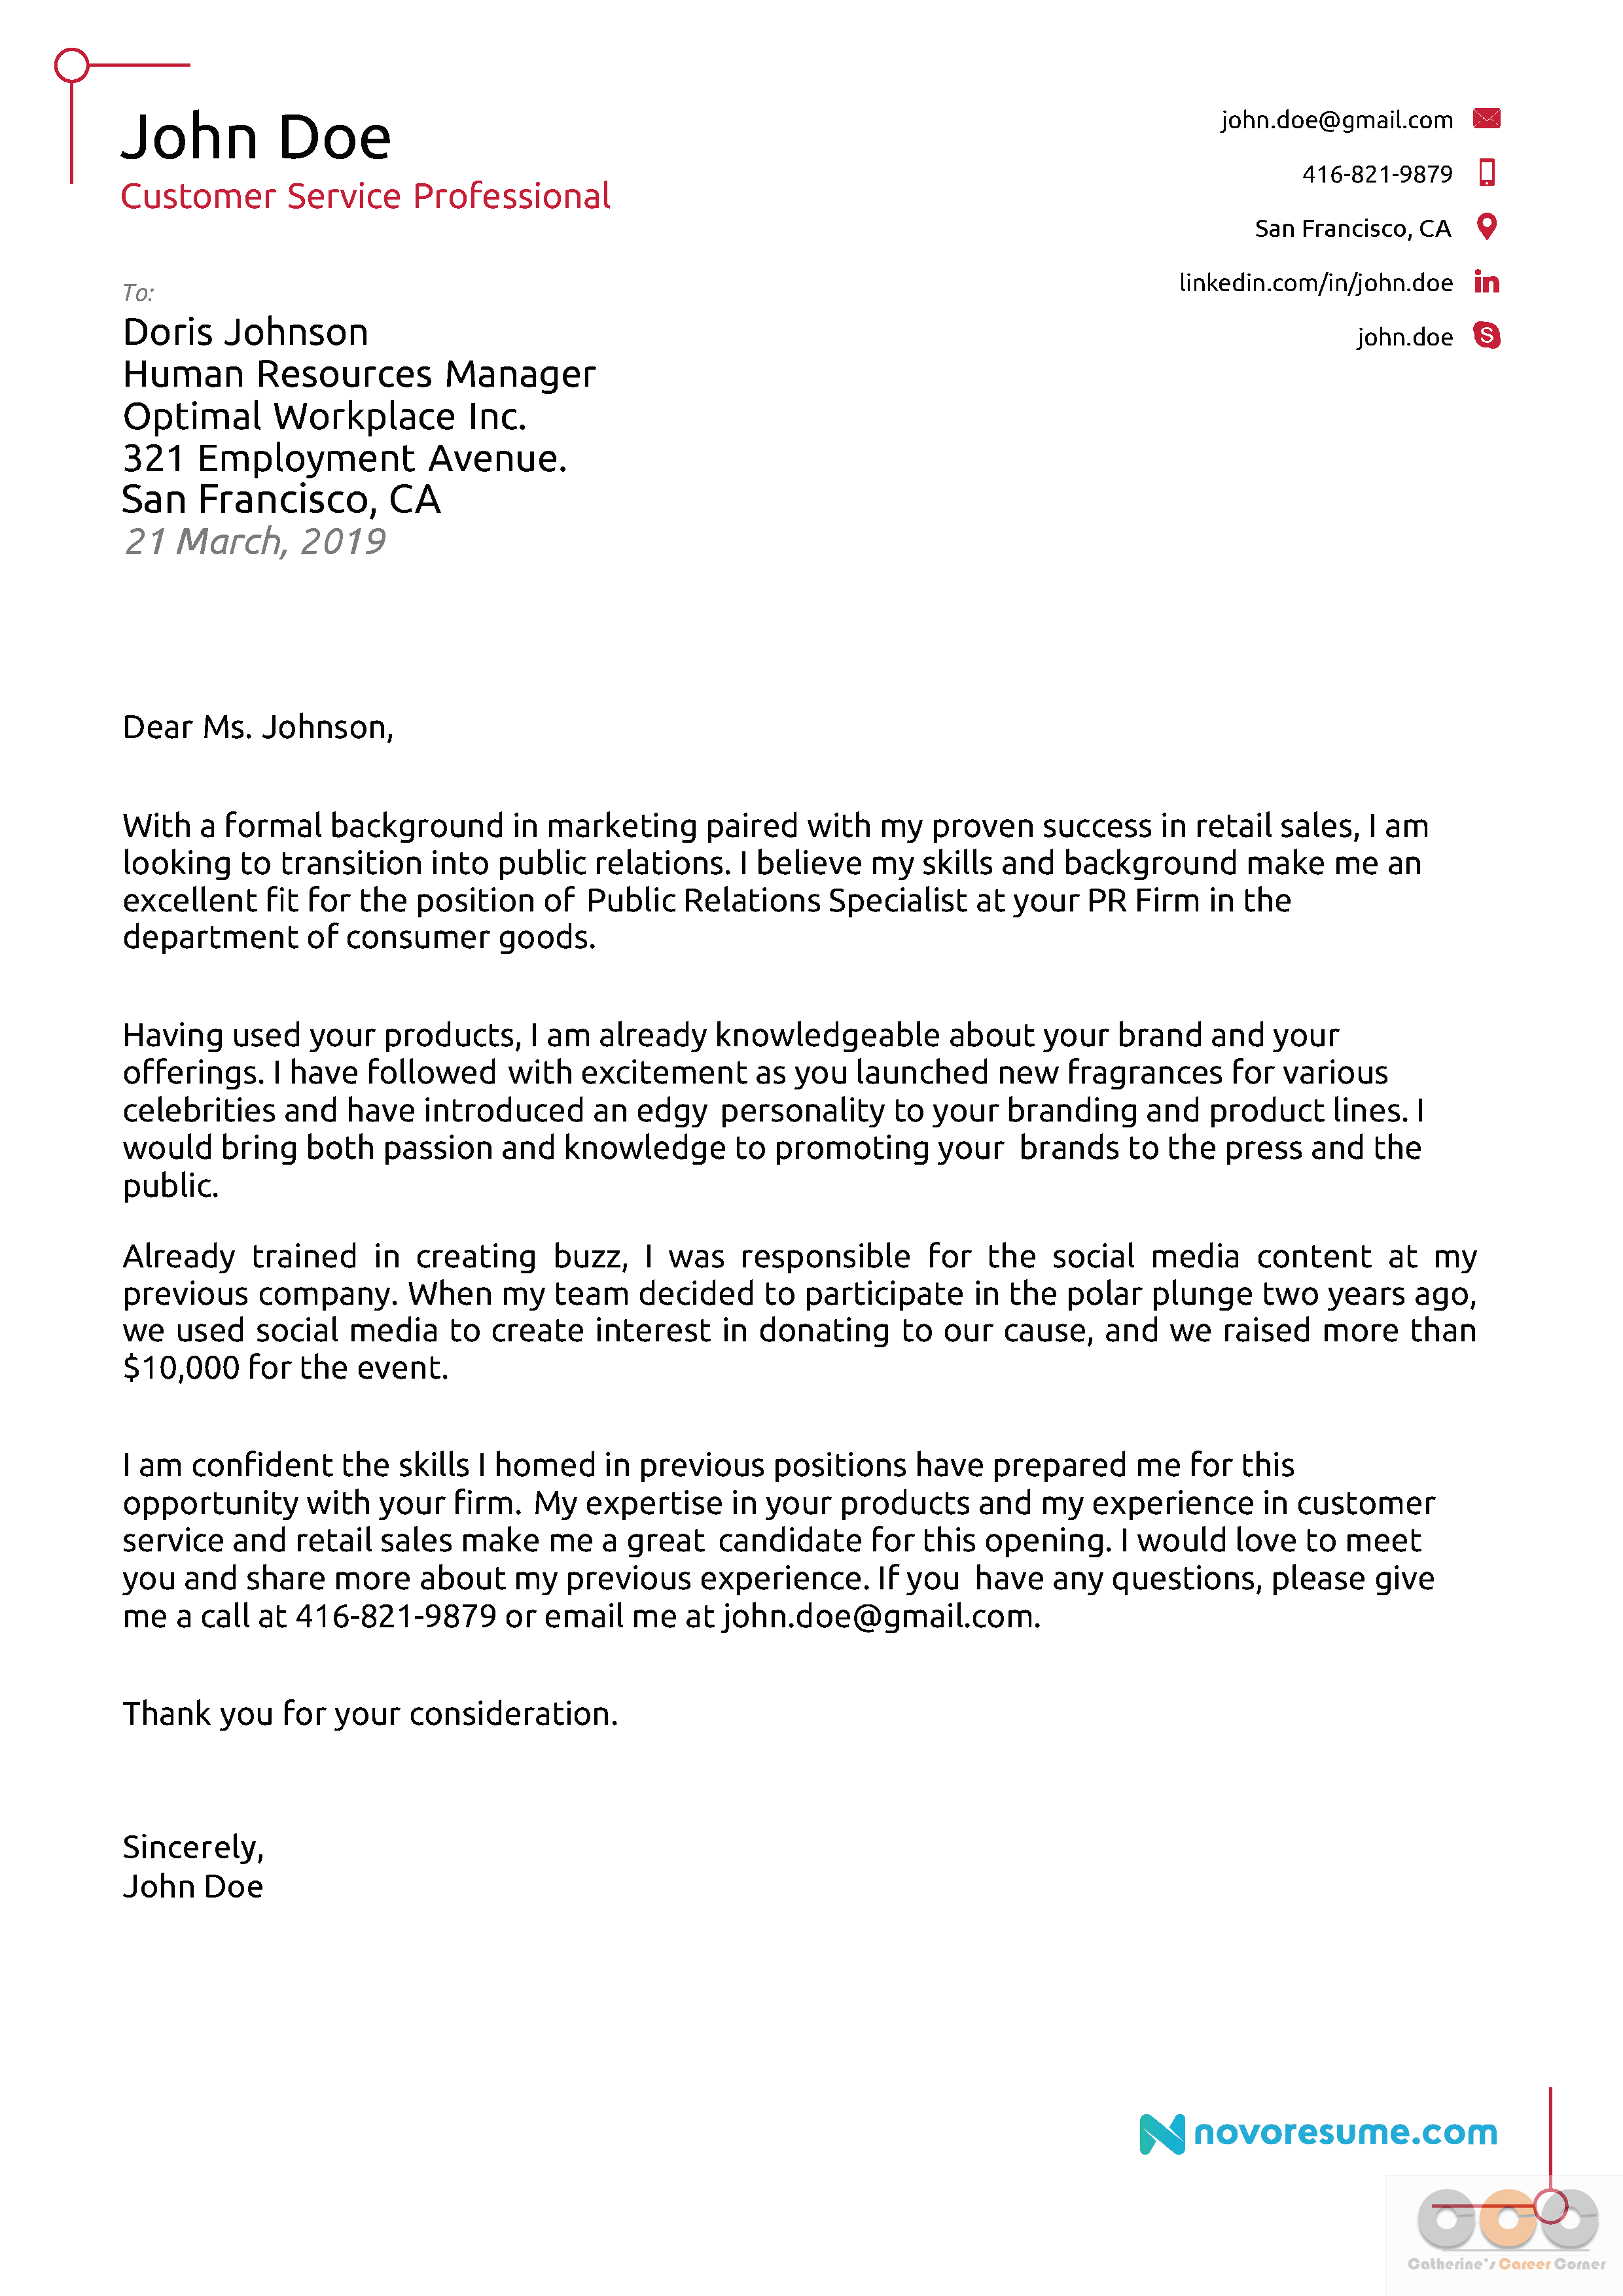 Amazing Cover Letter Examples for 2020 +Writing Tips (2480 x 3509 Pixel)